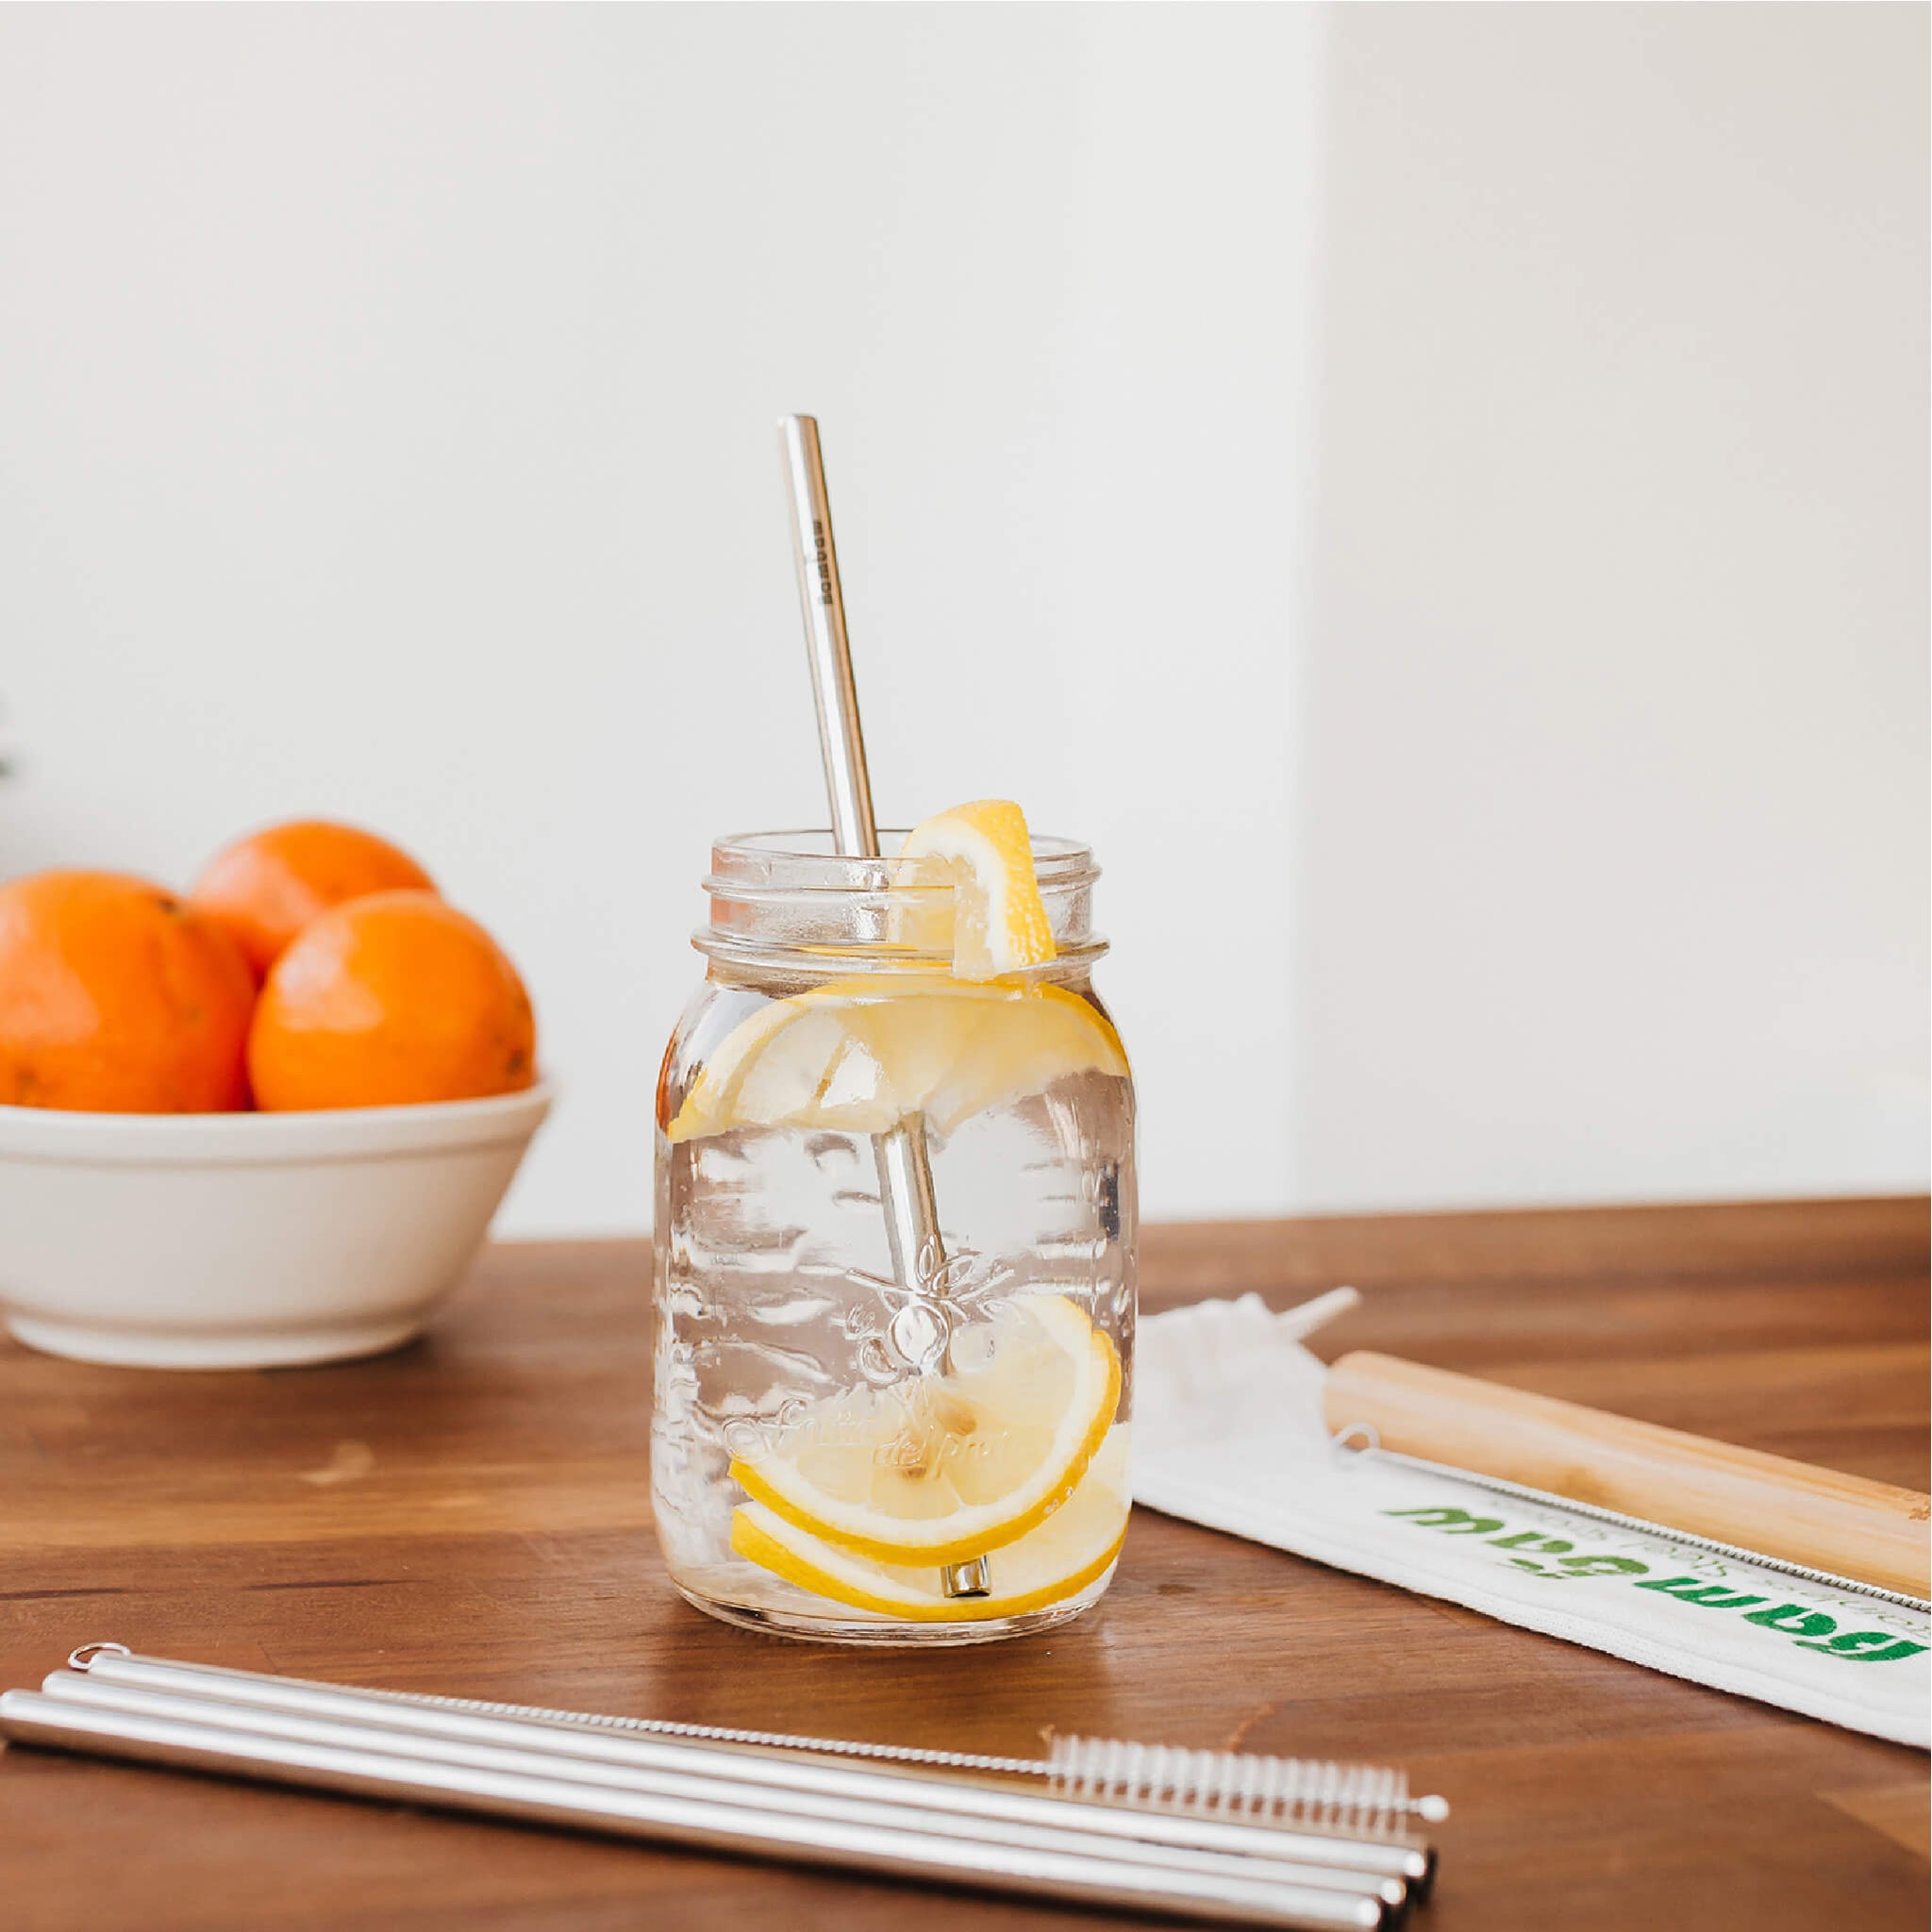 stainless steel straws in glass